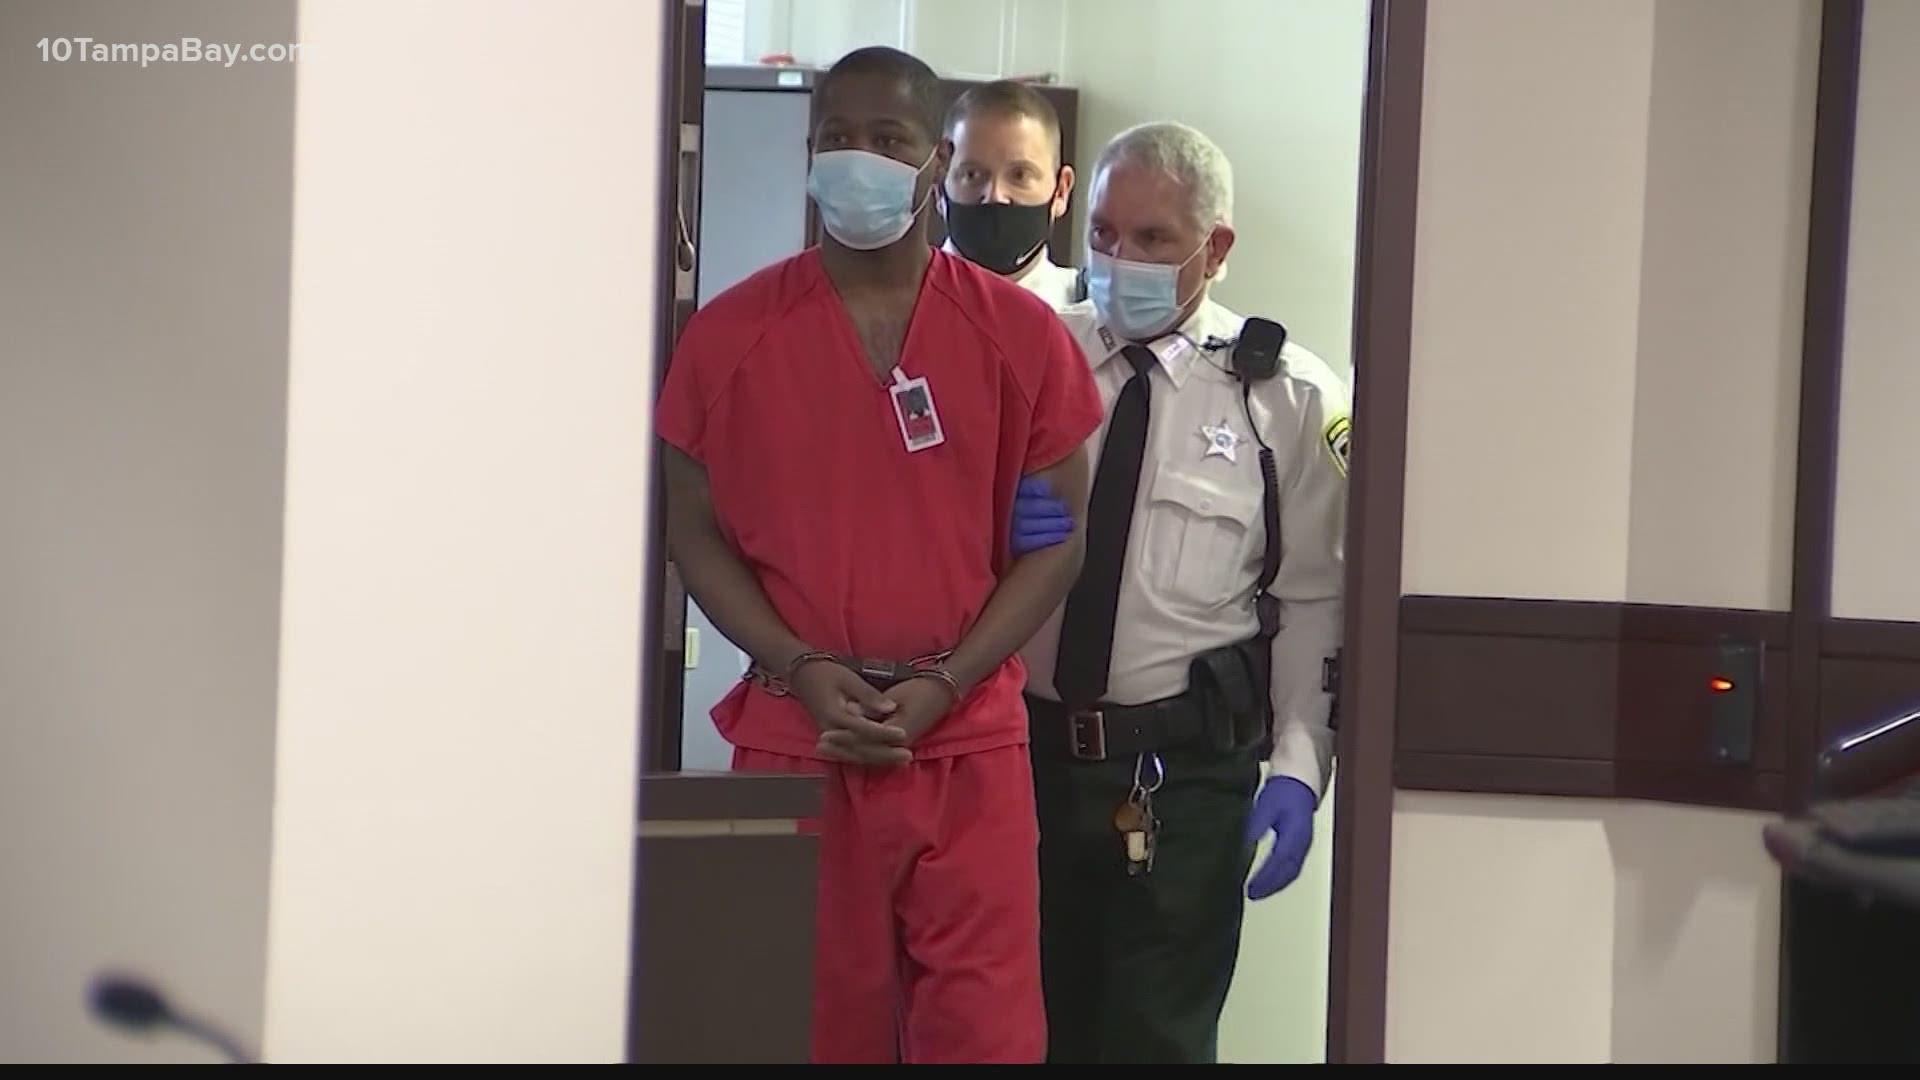 A judge granted the motion on Wednesday for four different trials for accused Tampa Bay serial killer Howell Donaldson III.